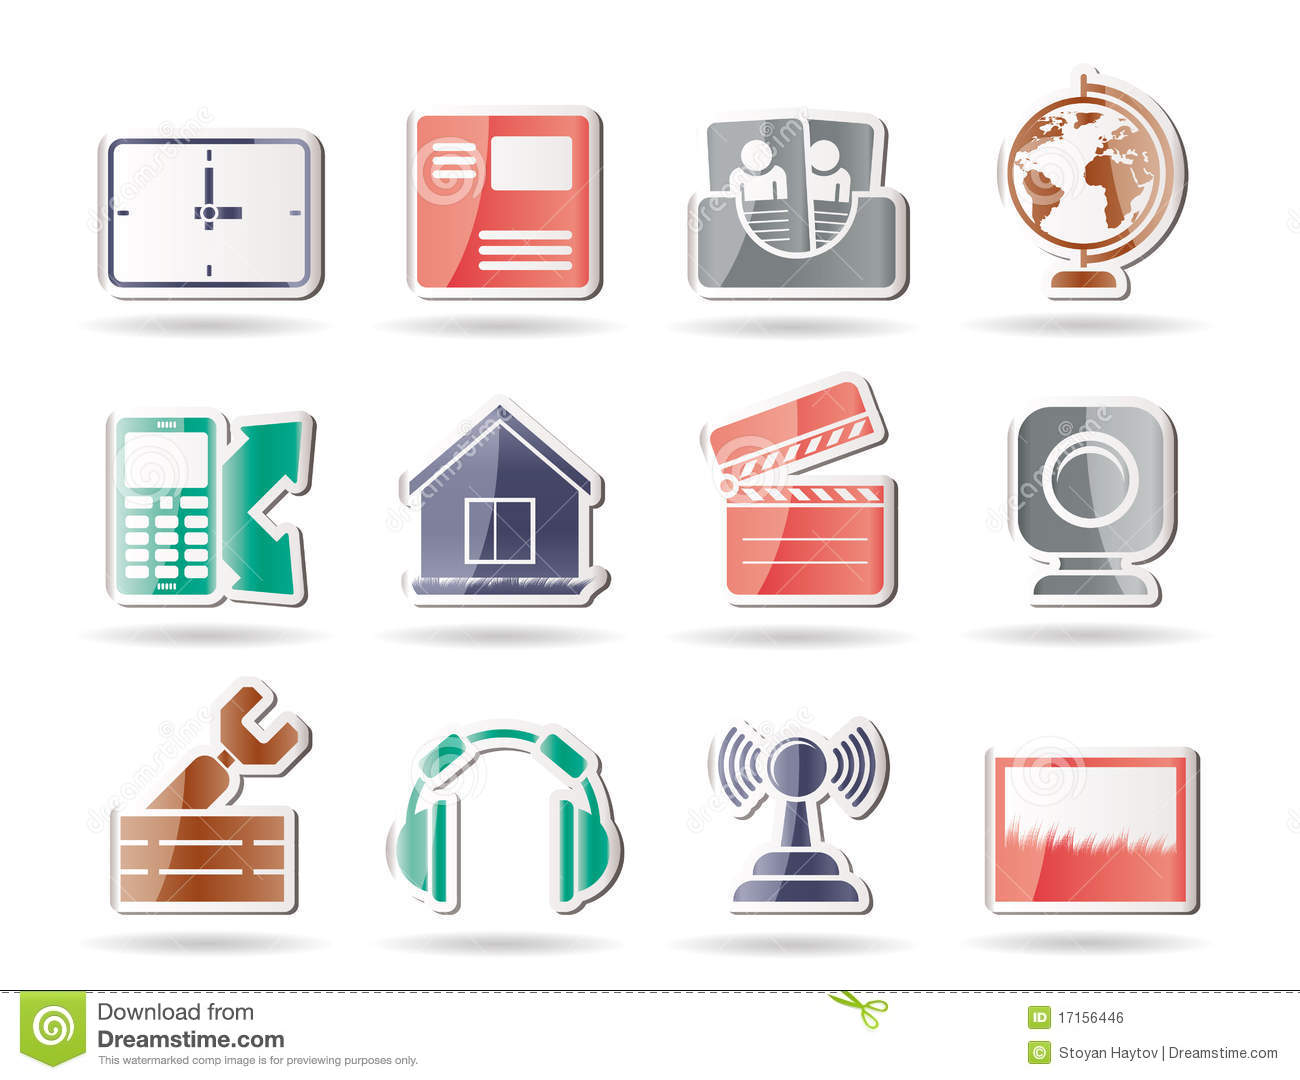 Mobile Phone Computer Icons